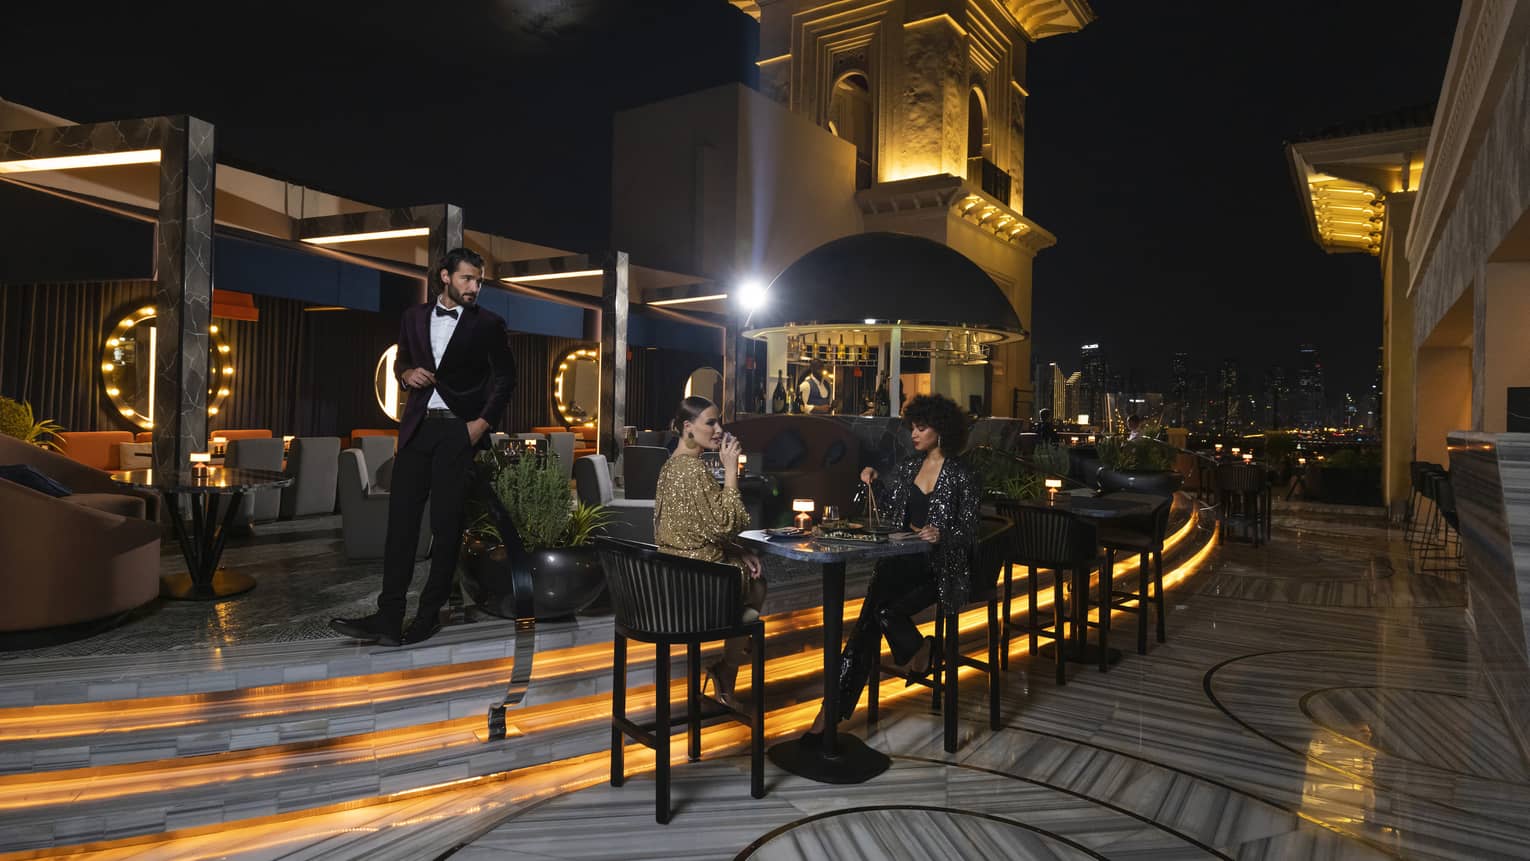 Rooftop lounge at night with two women sitting at a cocktail table and a man in a tuxedo walking behind them